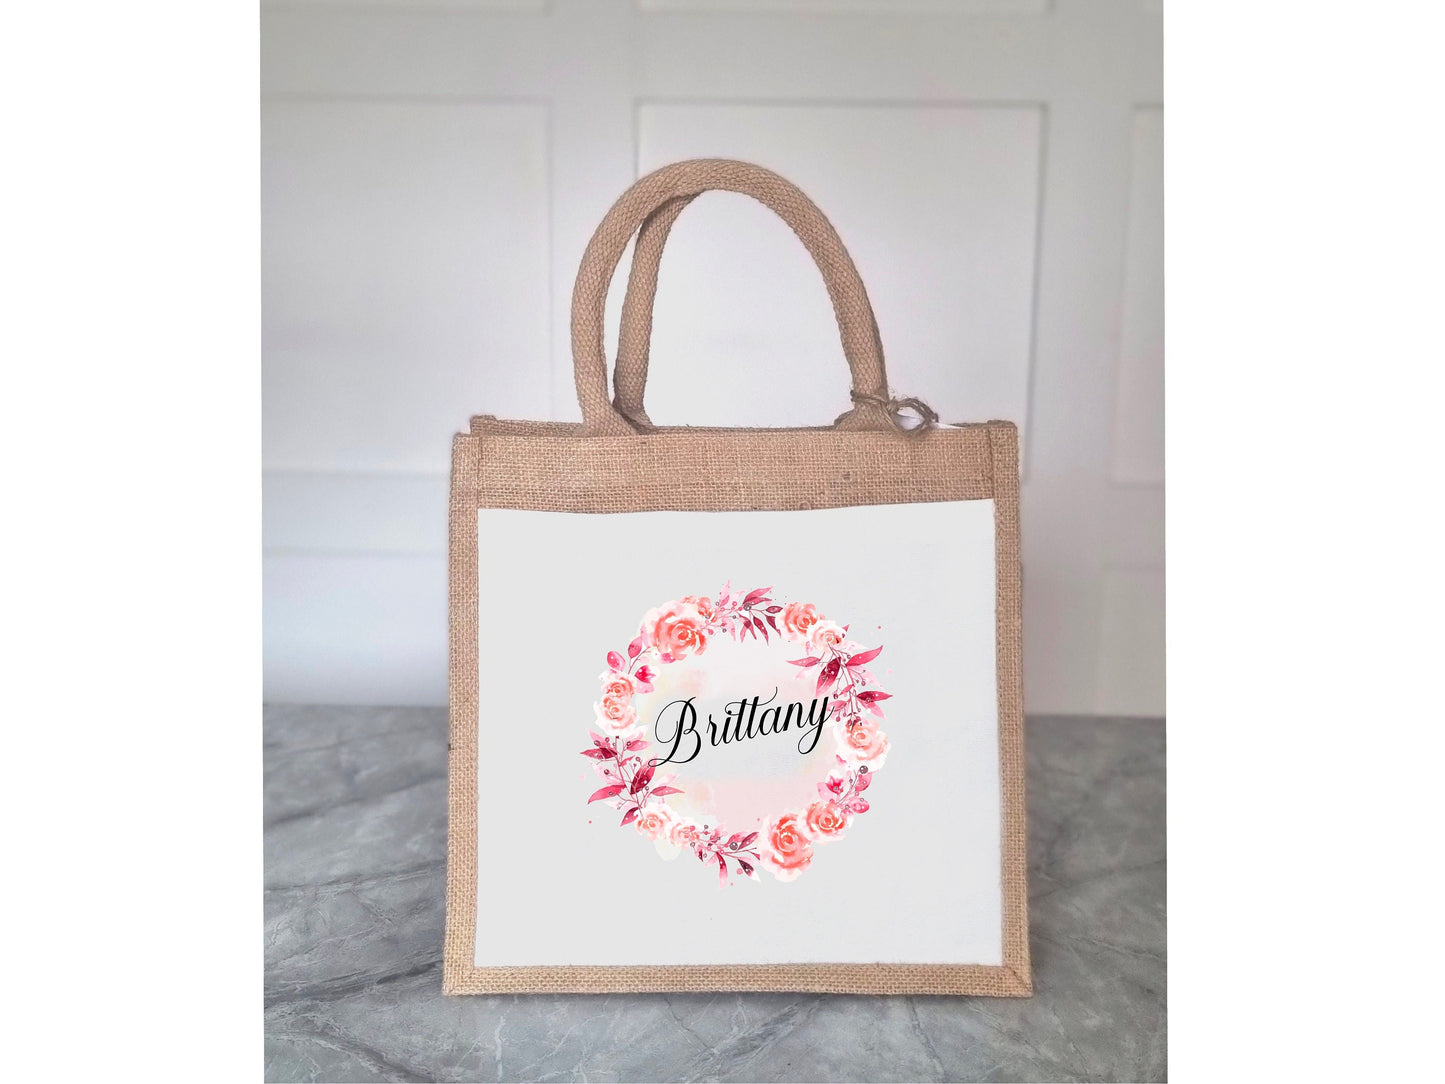 Personalised Tote bag for shopping